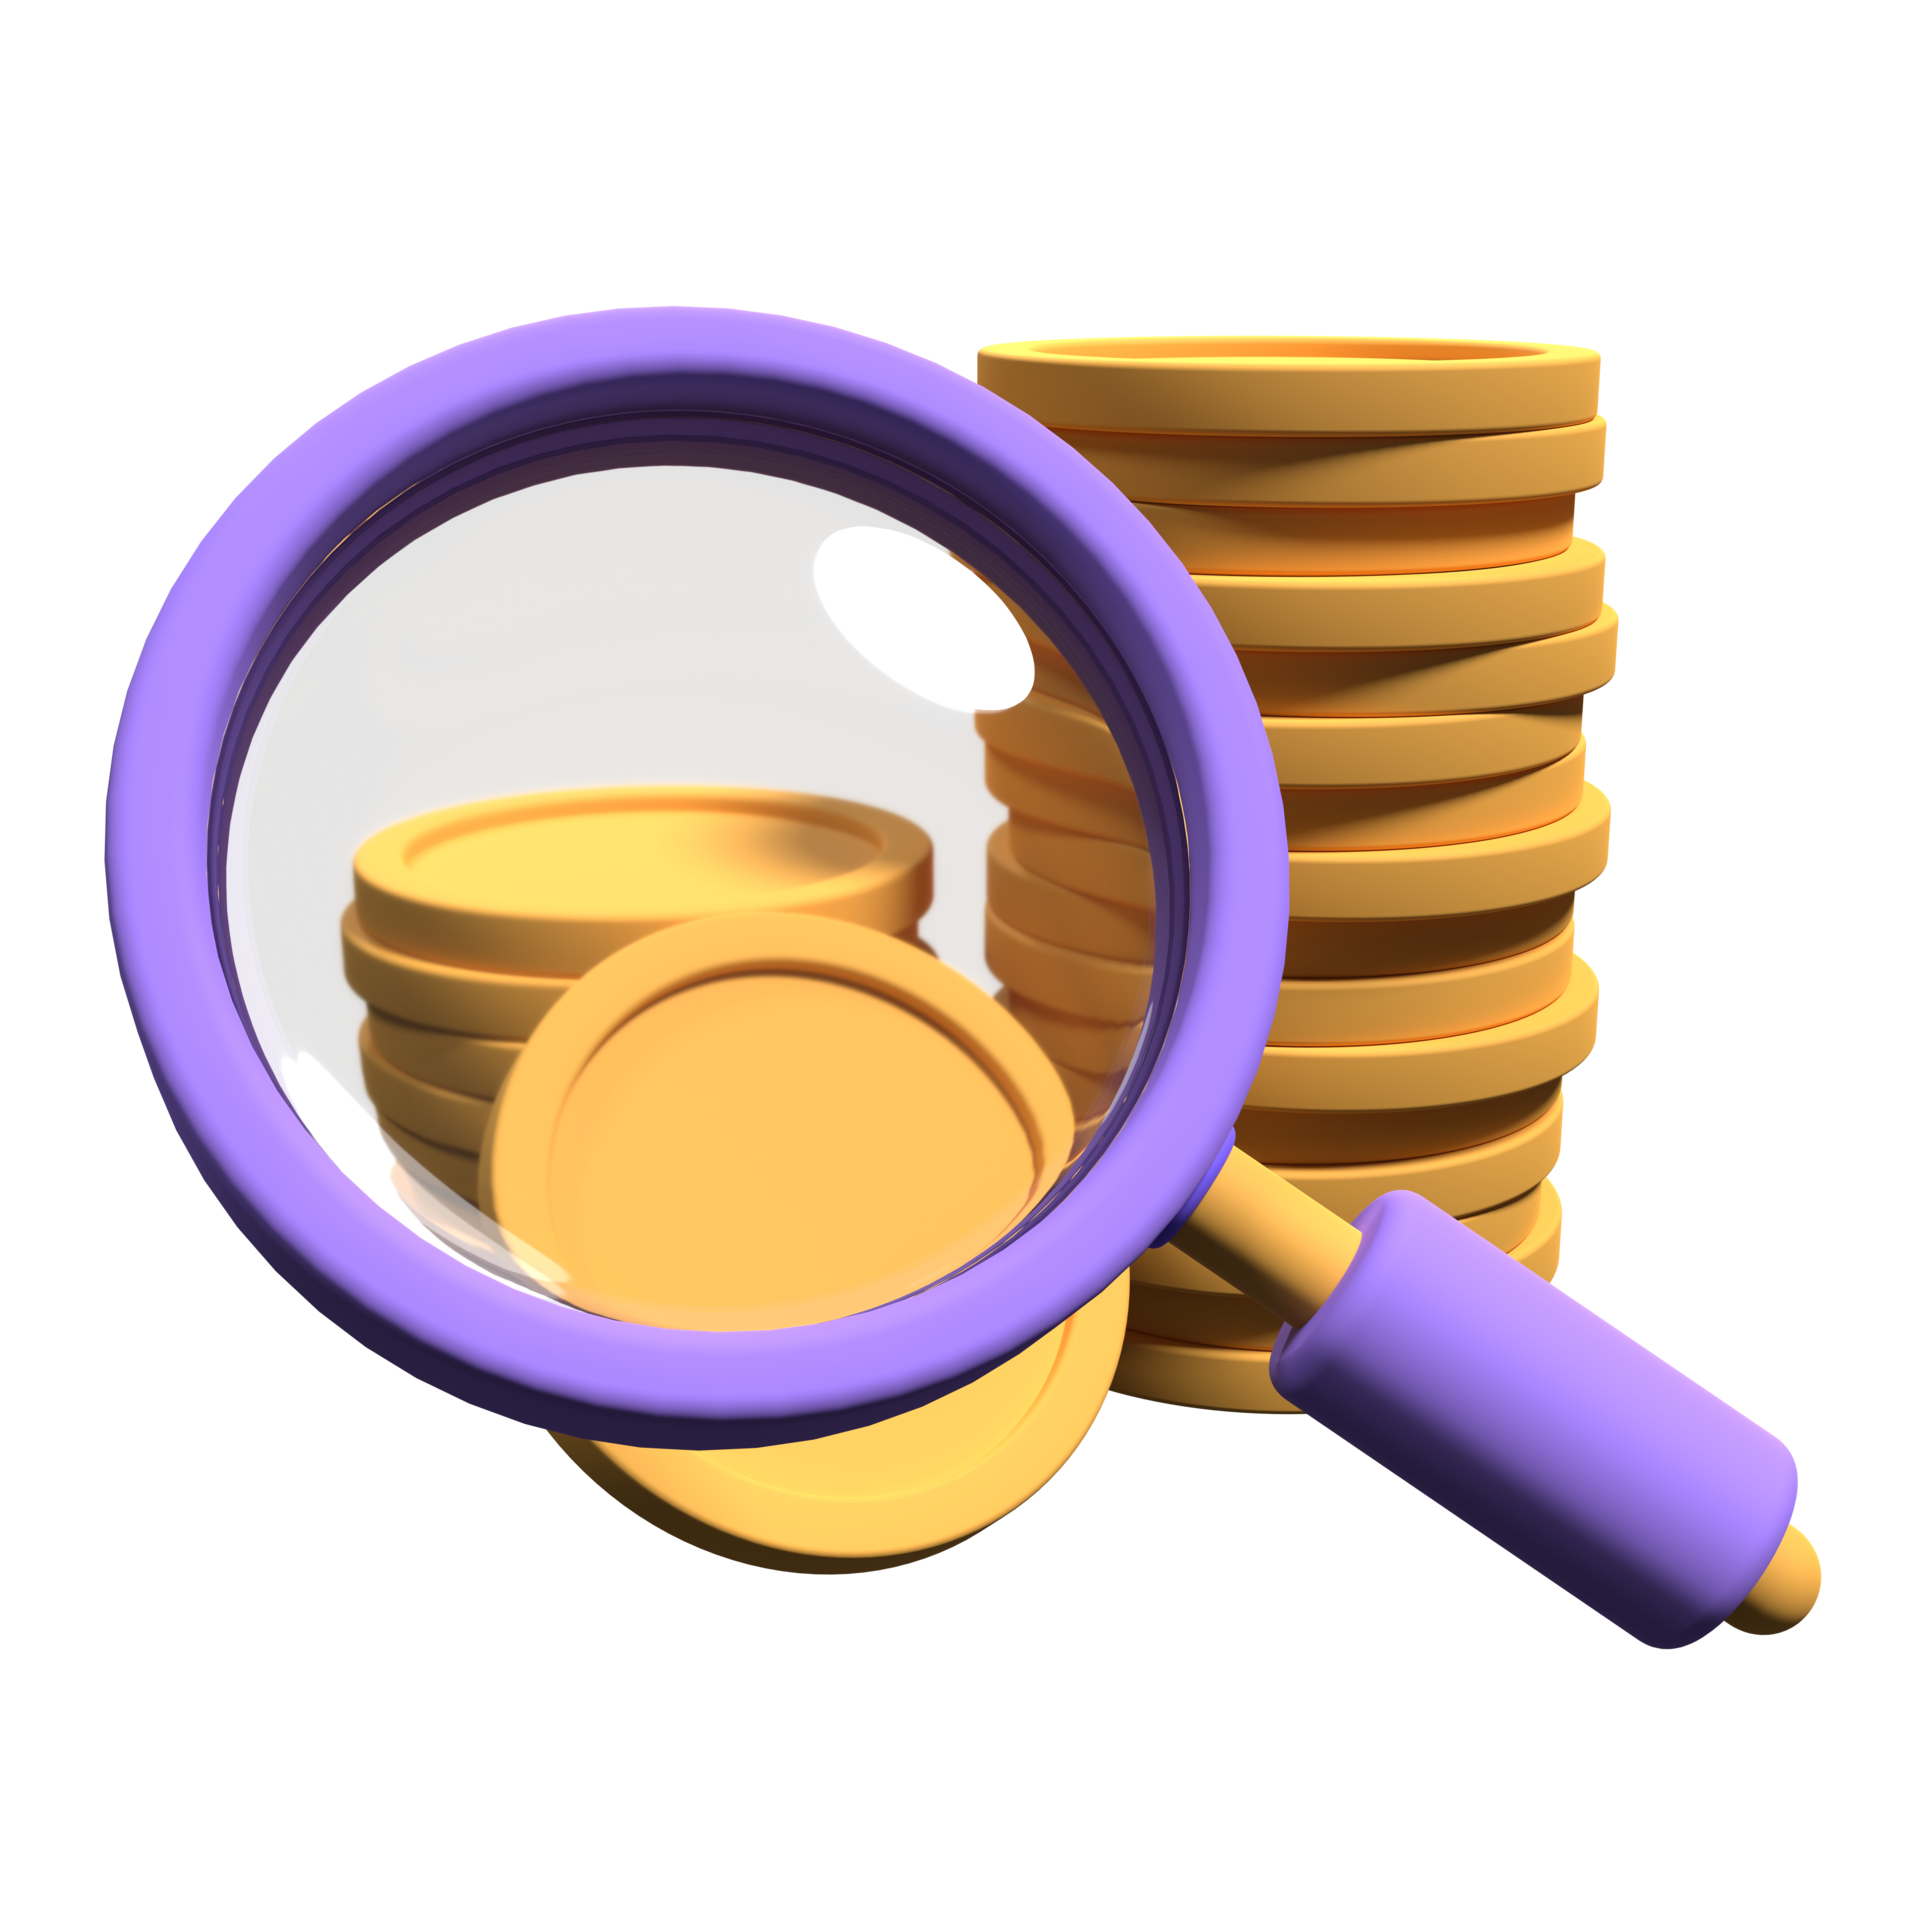 19,136 Money Coins Magnifying Glass Images, Stock Photos, 3D